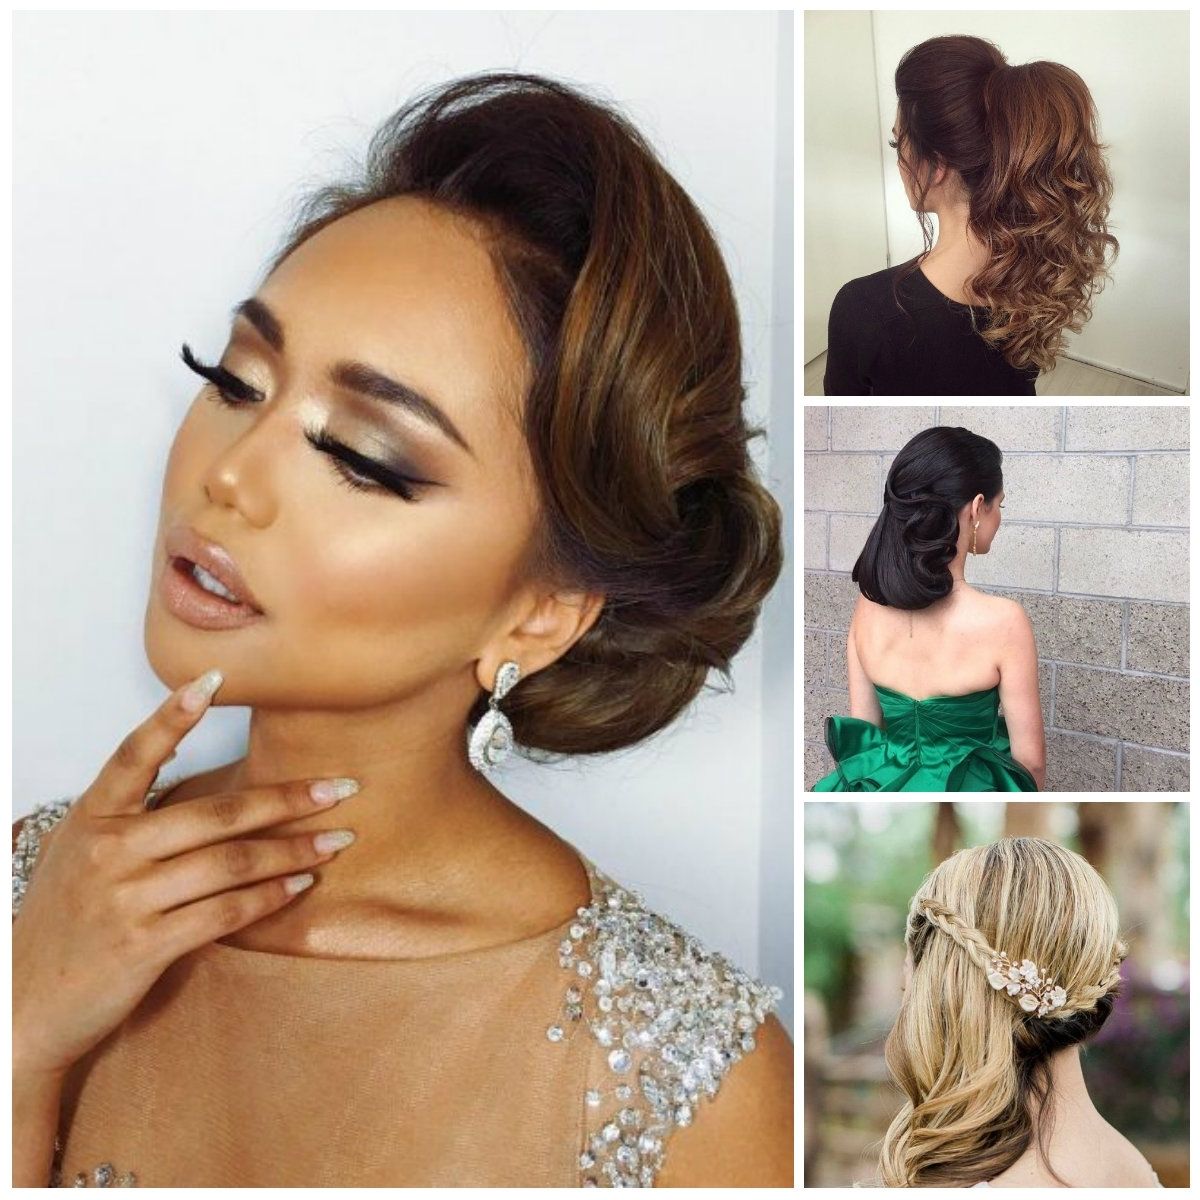 48 Latest & Best Prom Hairstyles 2017 | Hairstylo Intended For Updos For Long Hair Black Hair (View 10 of 15)